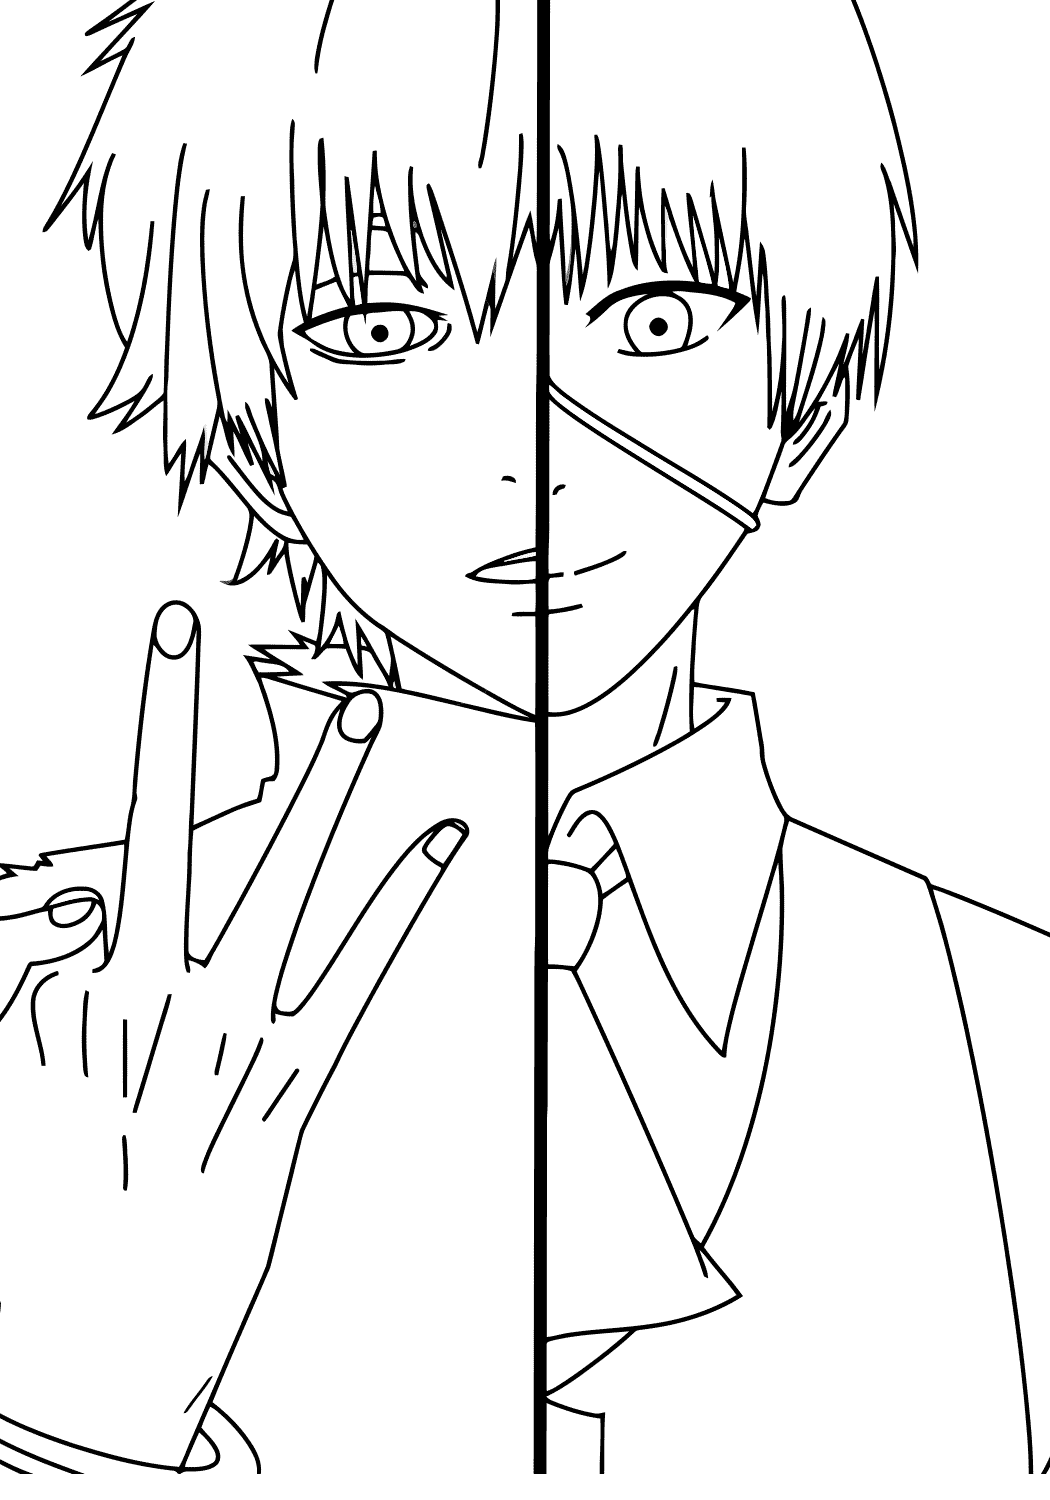 Tokyo Ghoul Coloring Pages to download and print for free